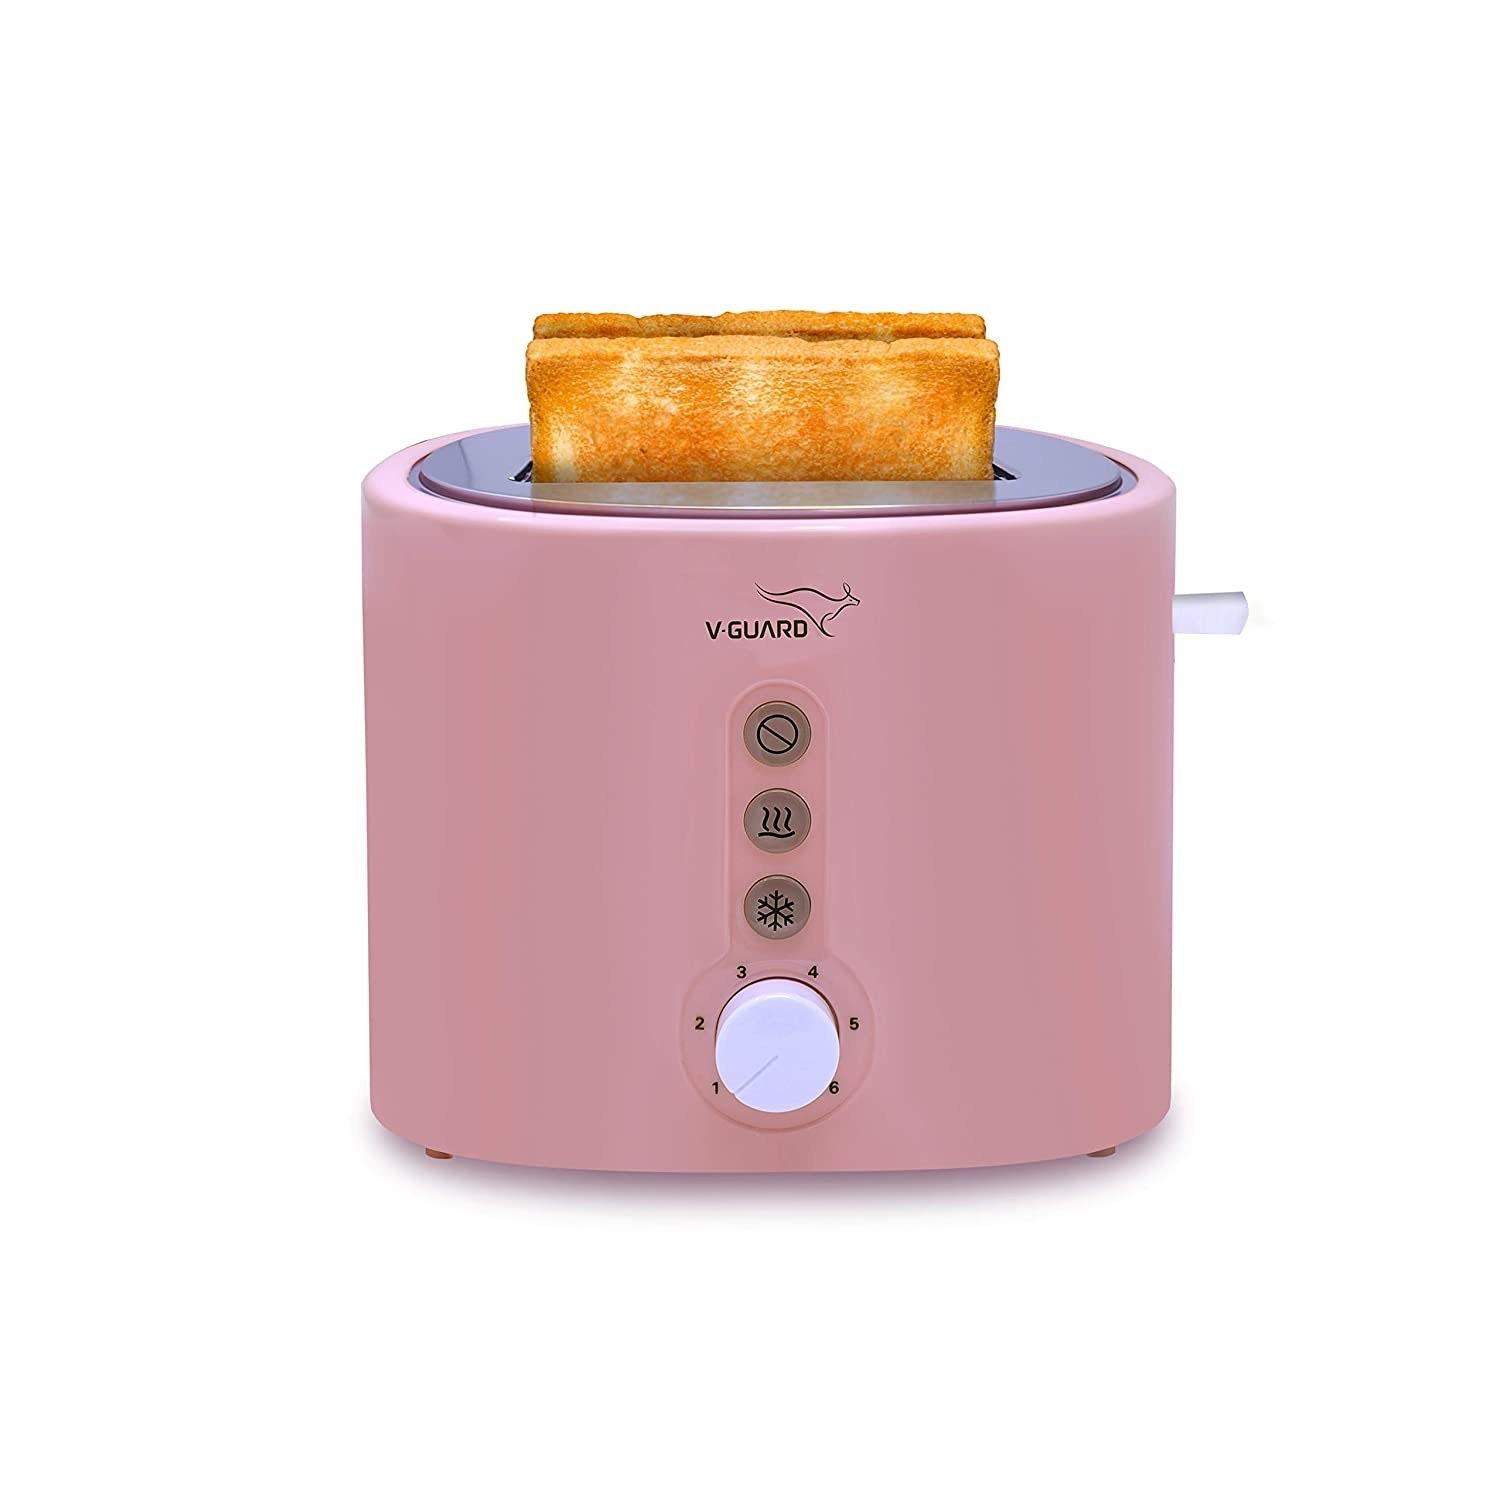 A pink popup toaster 